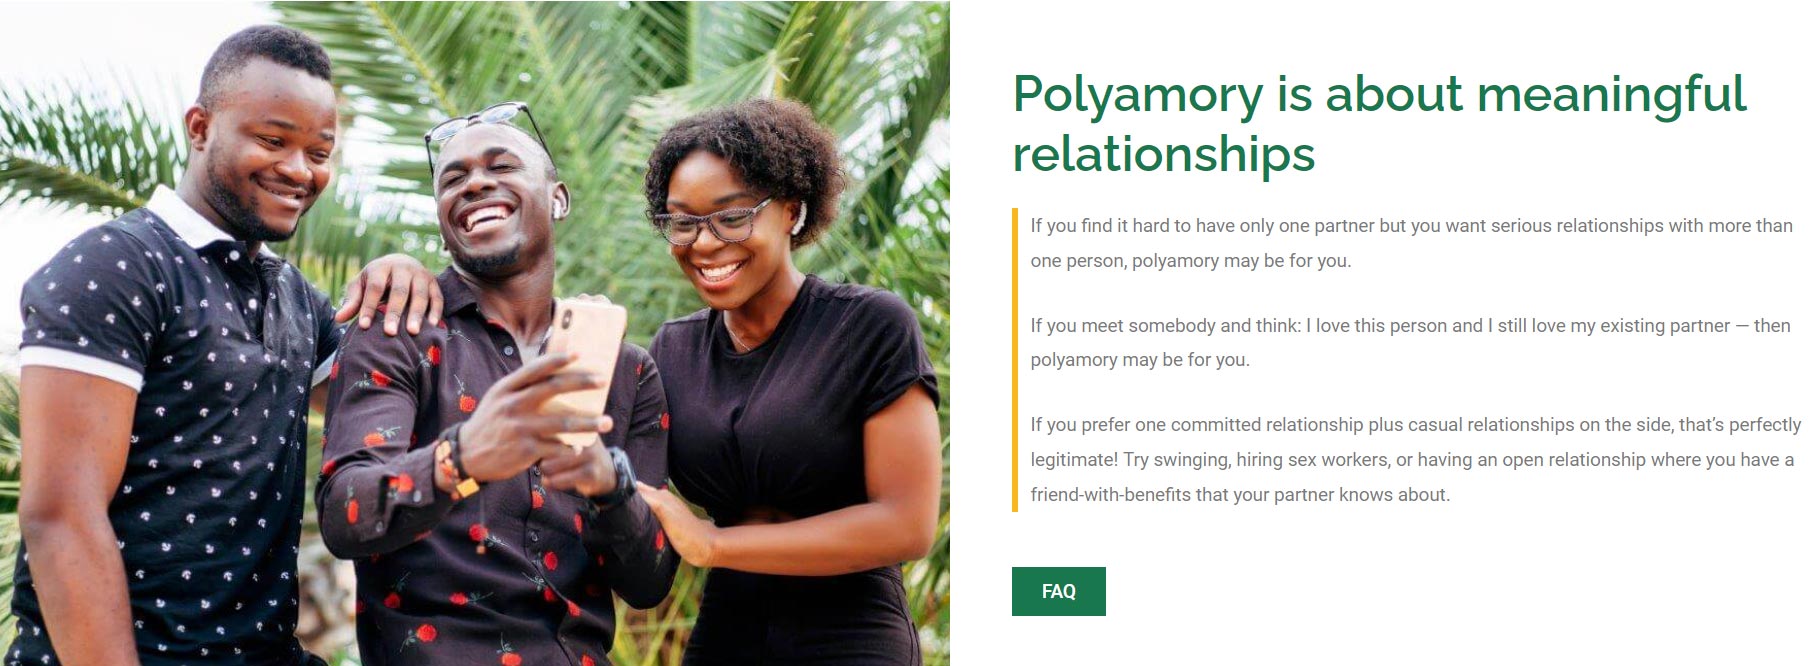 Polyamory in the News South Africa may become the first country to recognize full polyamorous marriage